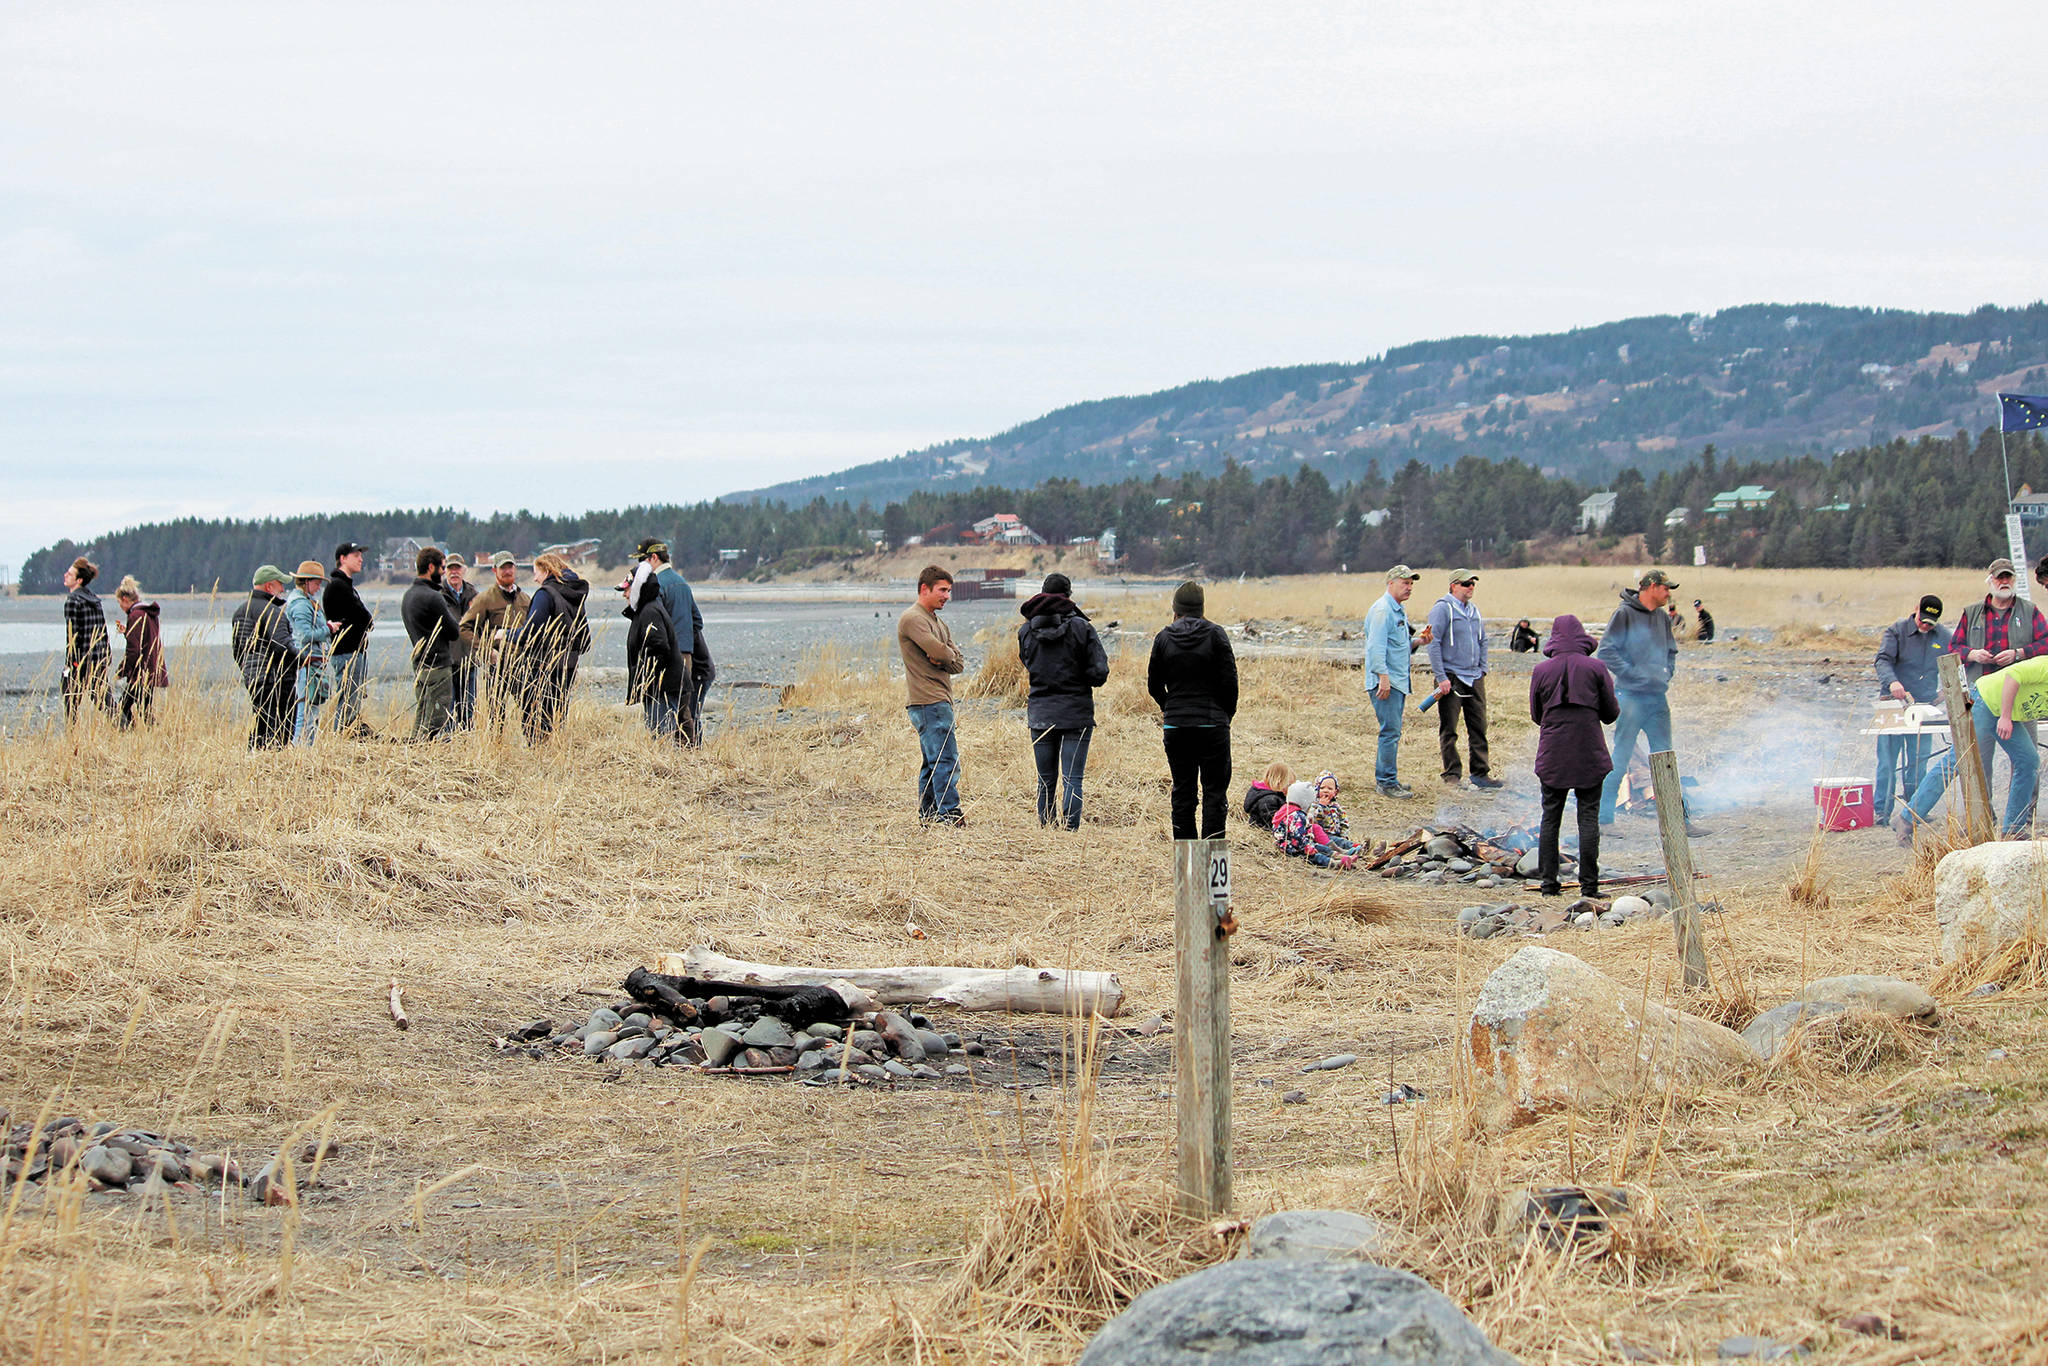 Participants in a community gathering and barbecue event spend time together on the beach Saturday, April 18, 2020 at Mariner Park in Homer, Alaska. The gathering was held by the Homer’s Sons of Liberty while the state health mandate that bans all in-person gatherings was still in place. (Photo by Megan Pacer/Homer News)